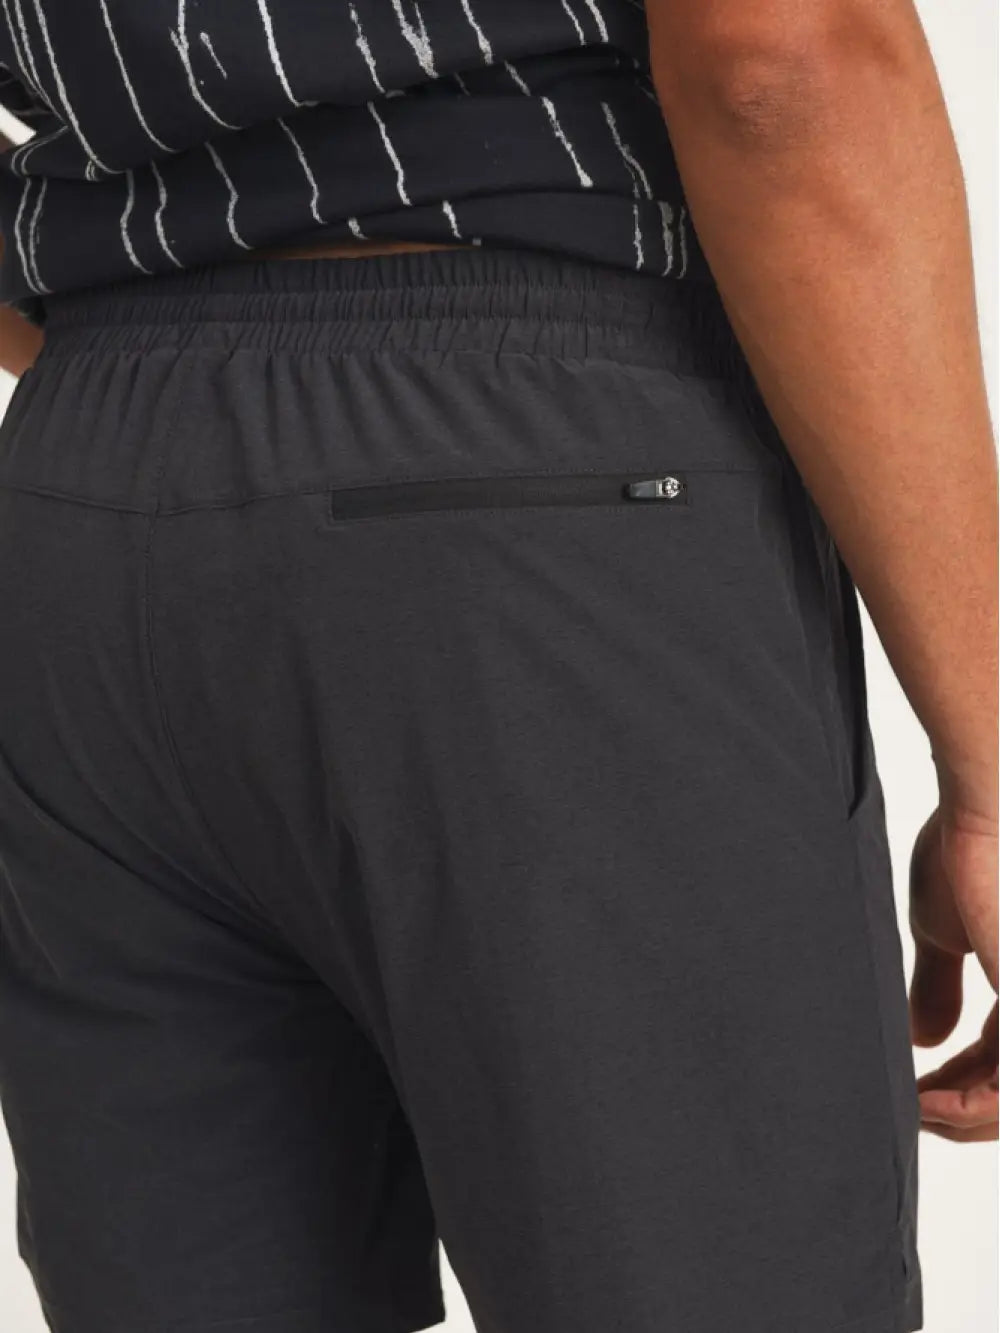 MEN’S Lined Active Shorts